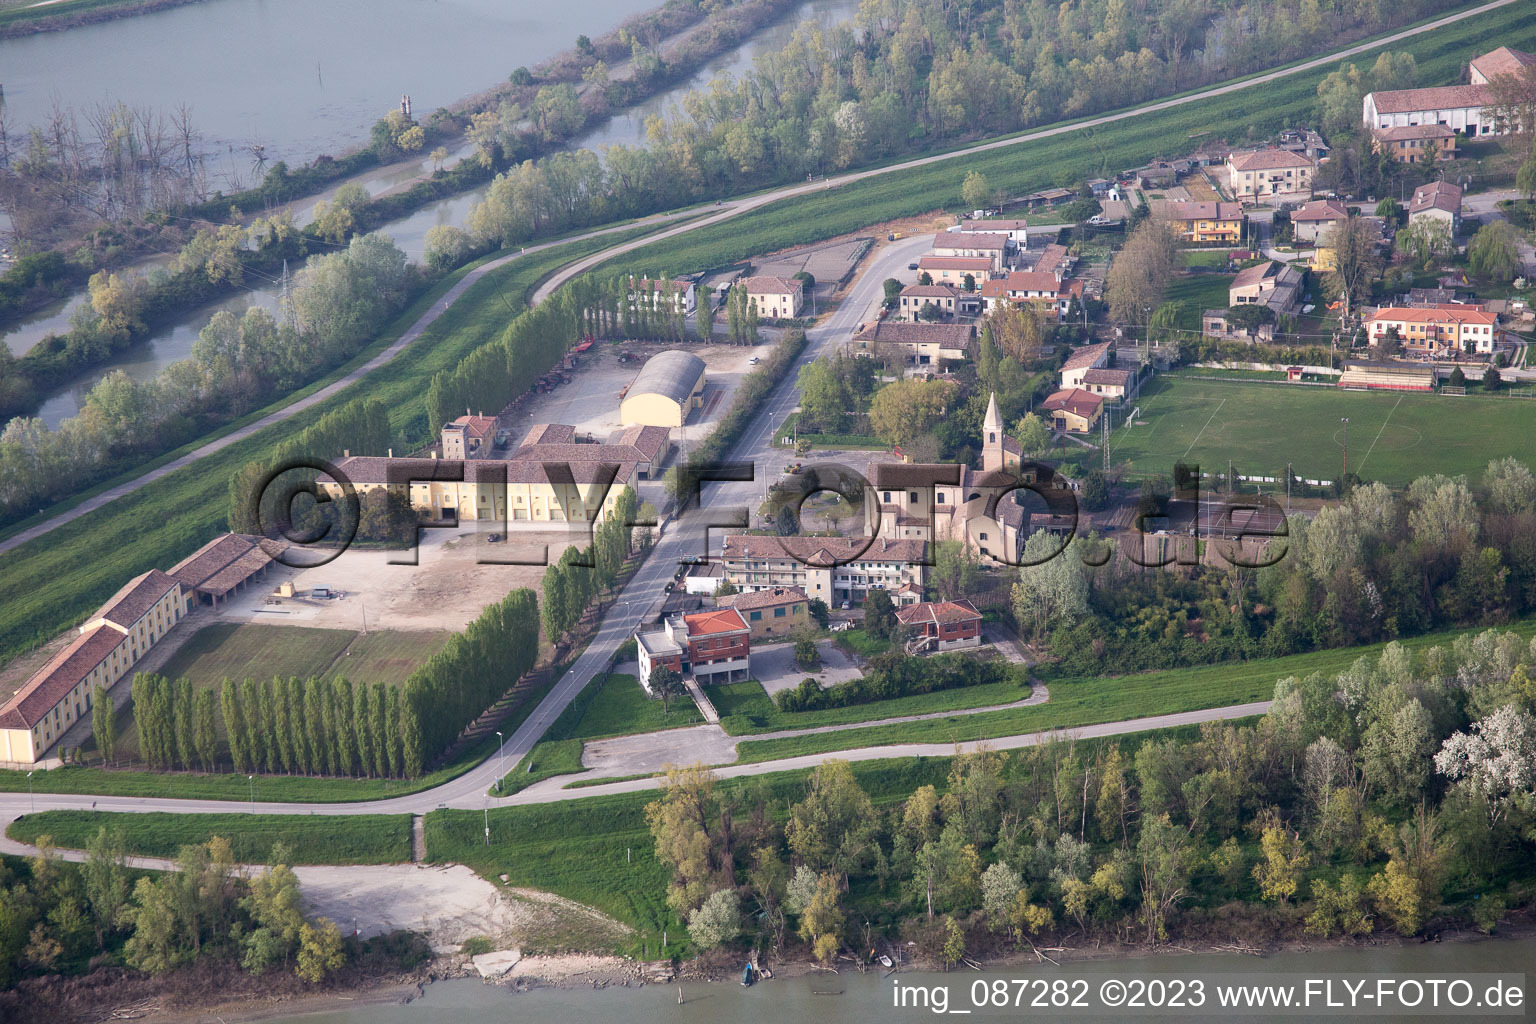 Ca' Tiepolo in the state Veneto, Italy seen from above